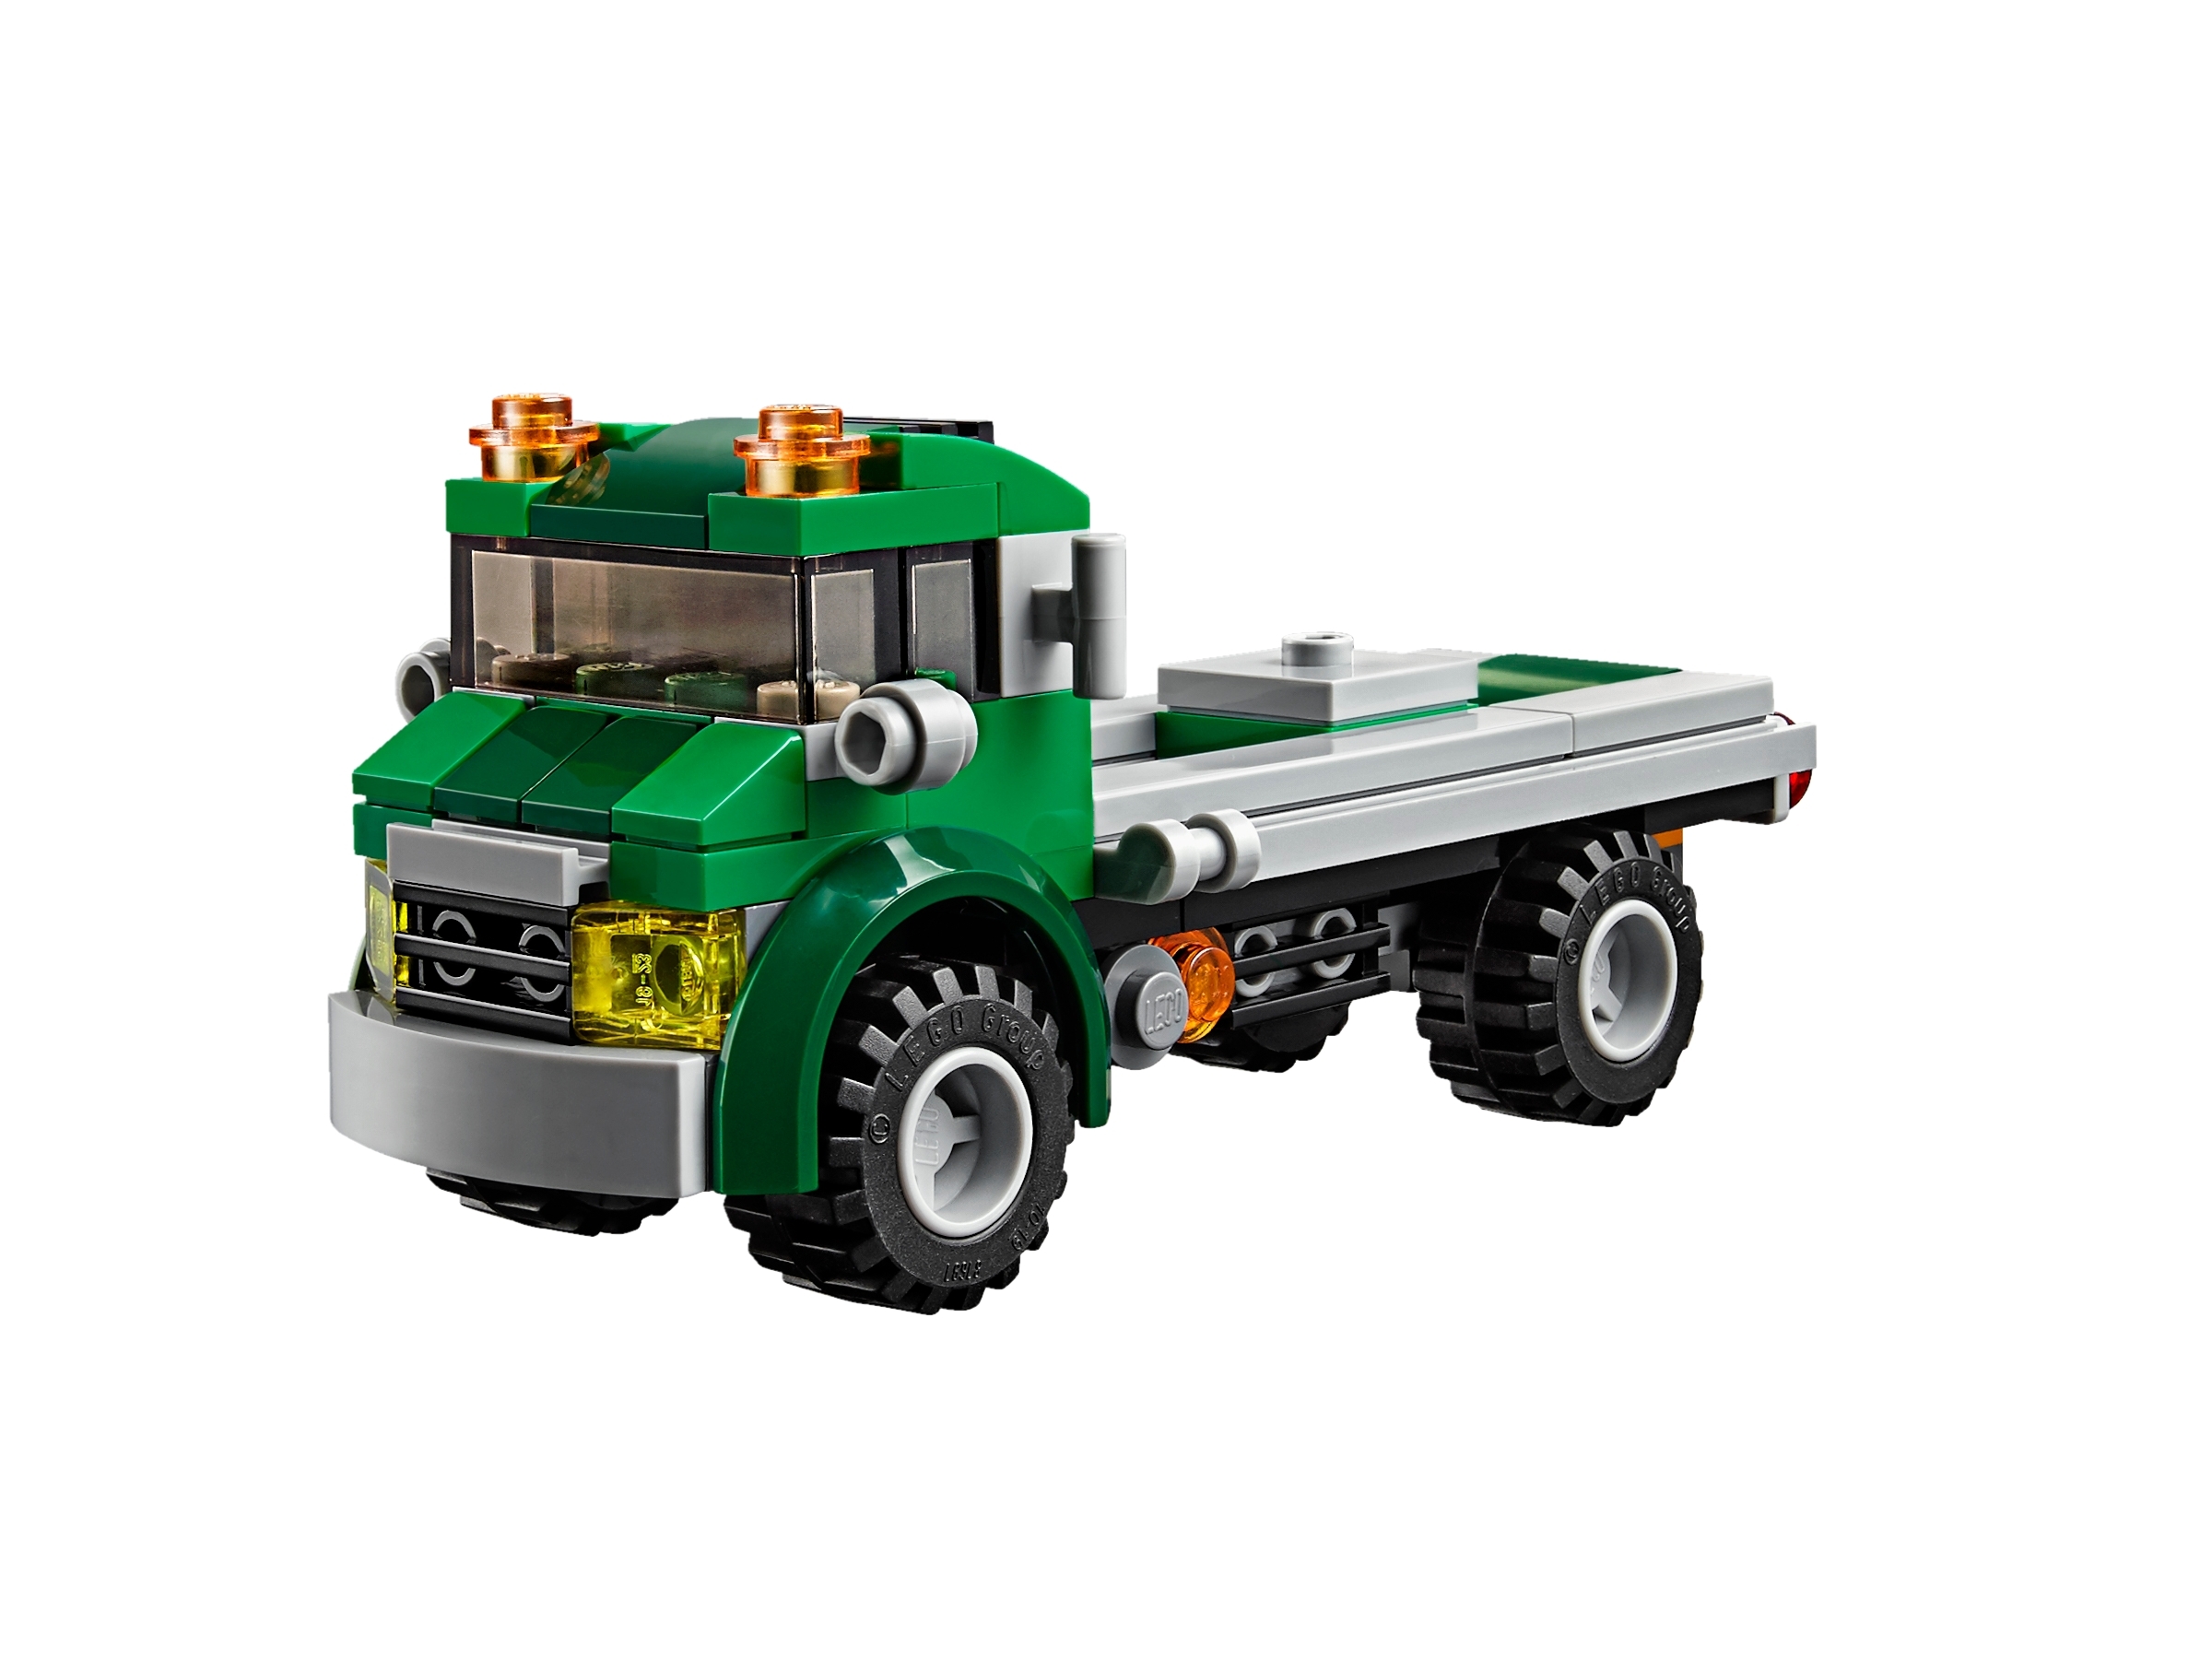 Chopper Transporter 31043 | Creator 3-in-1 | Buy online at the Official LEGO® US